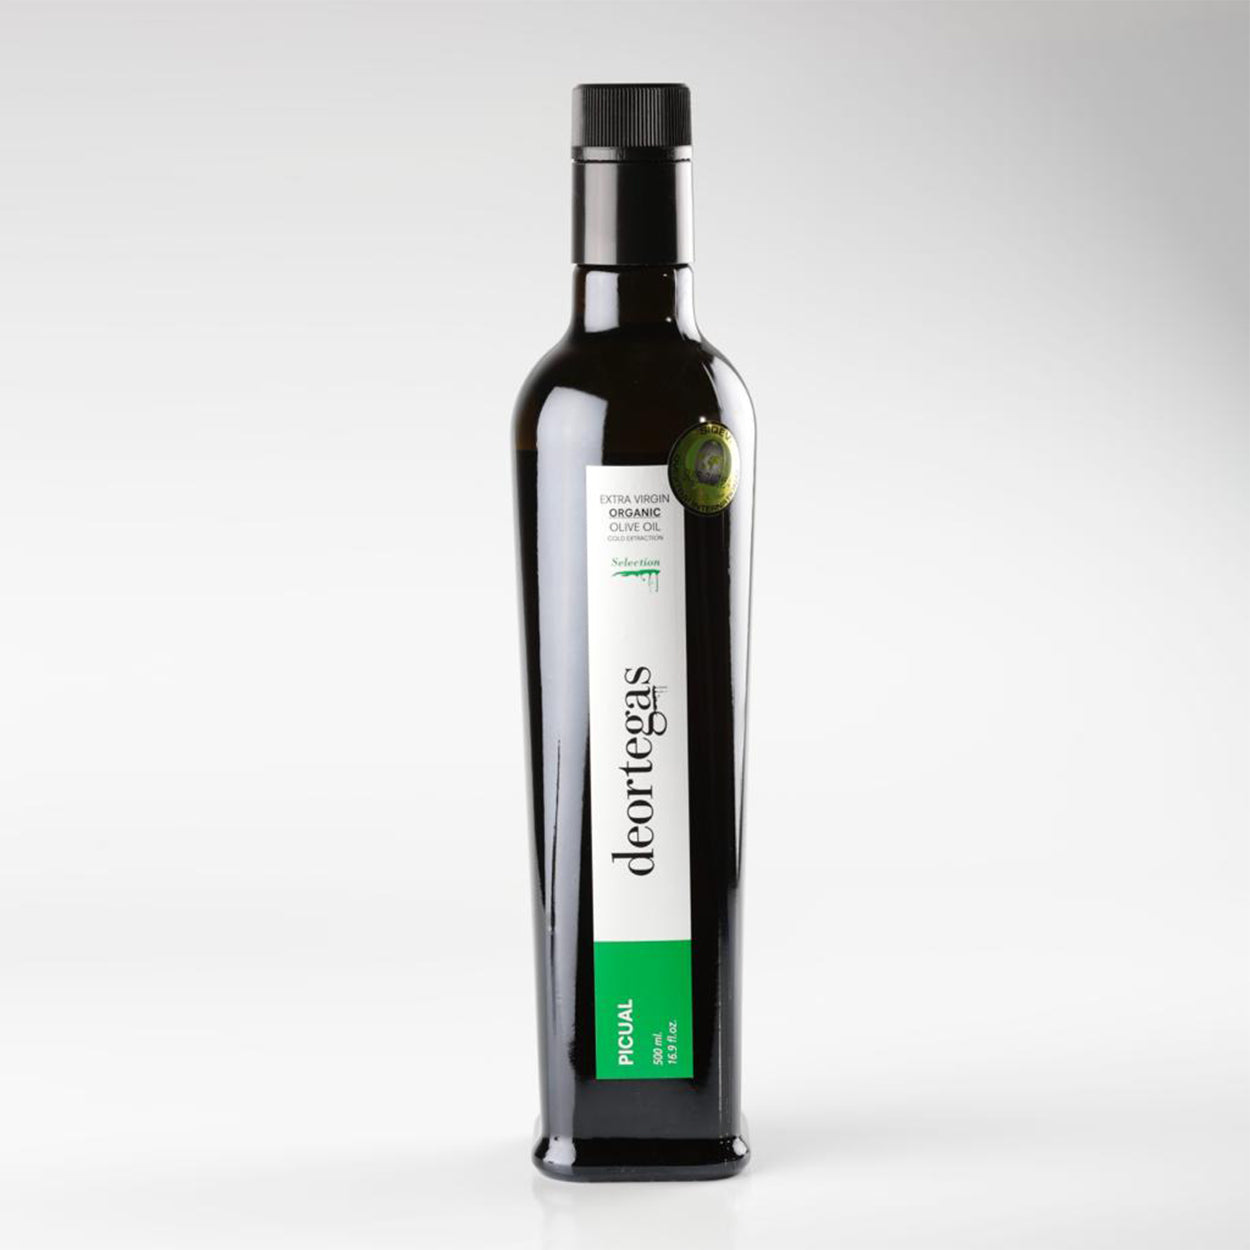 PICUAL 500ML ORGANIC EXTRA VIRGIN OLIVE OIL